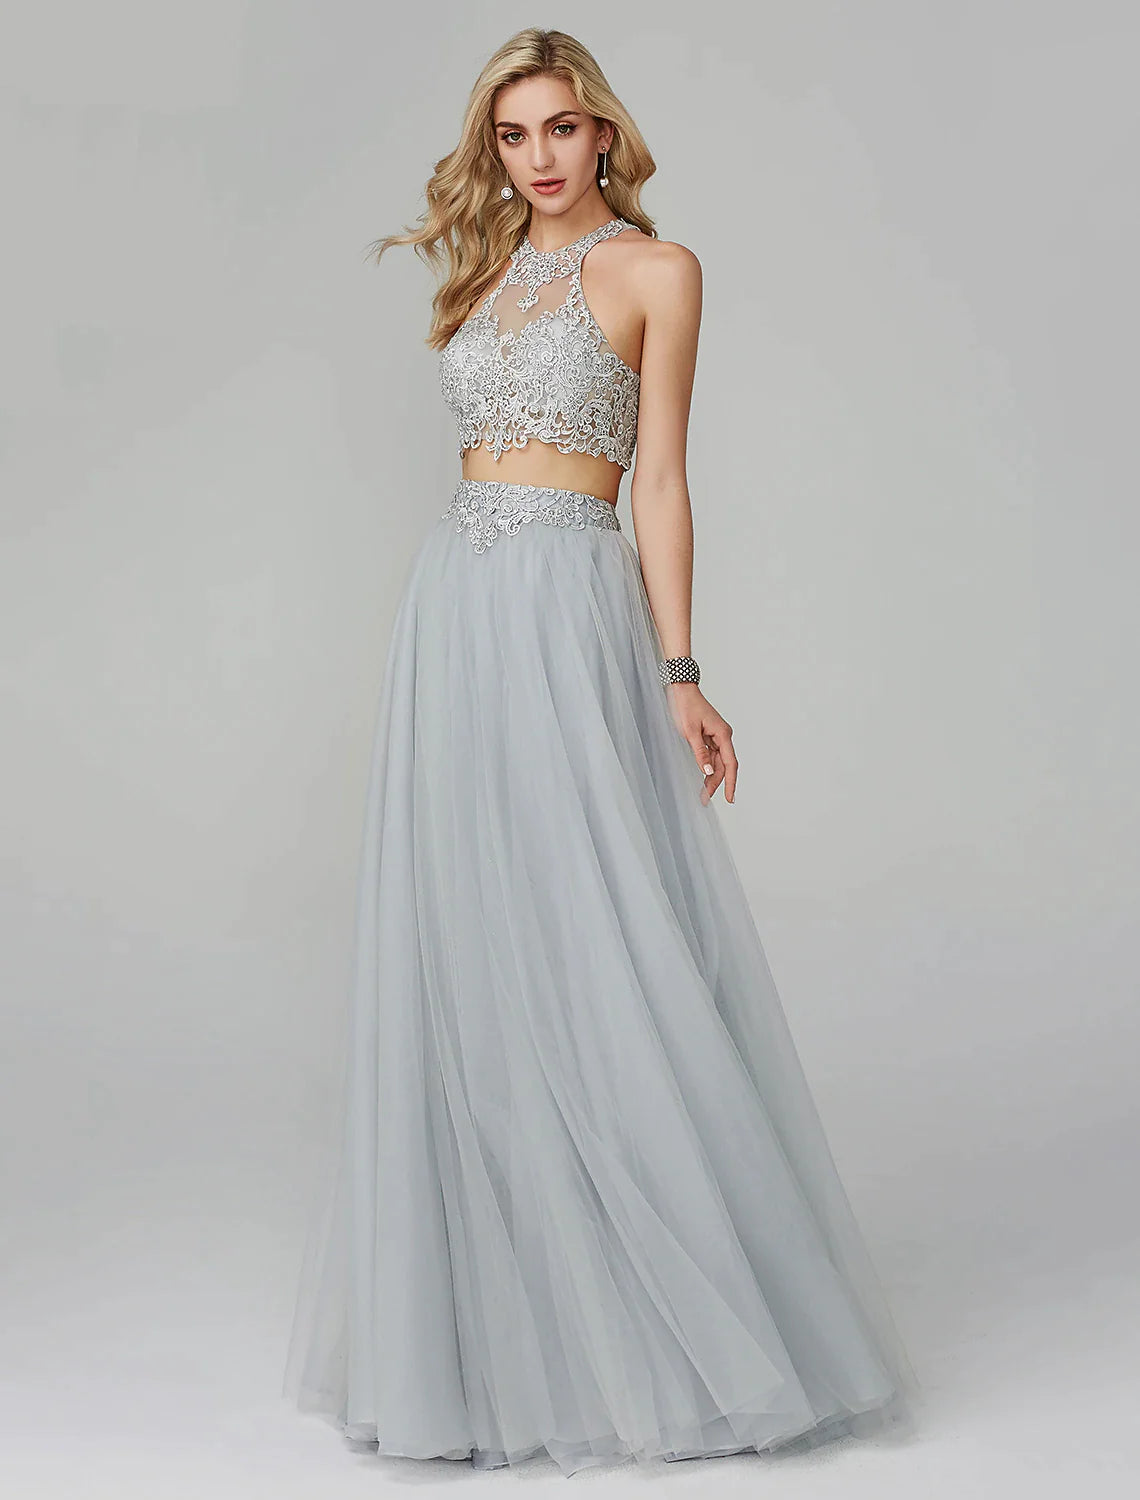 Two Piece Empire Prom Formal Evening Dress Halter Neck Sleeveless Floor Length Lace with Appliques